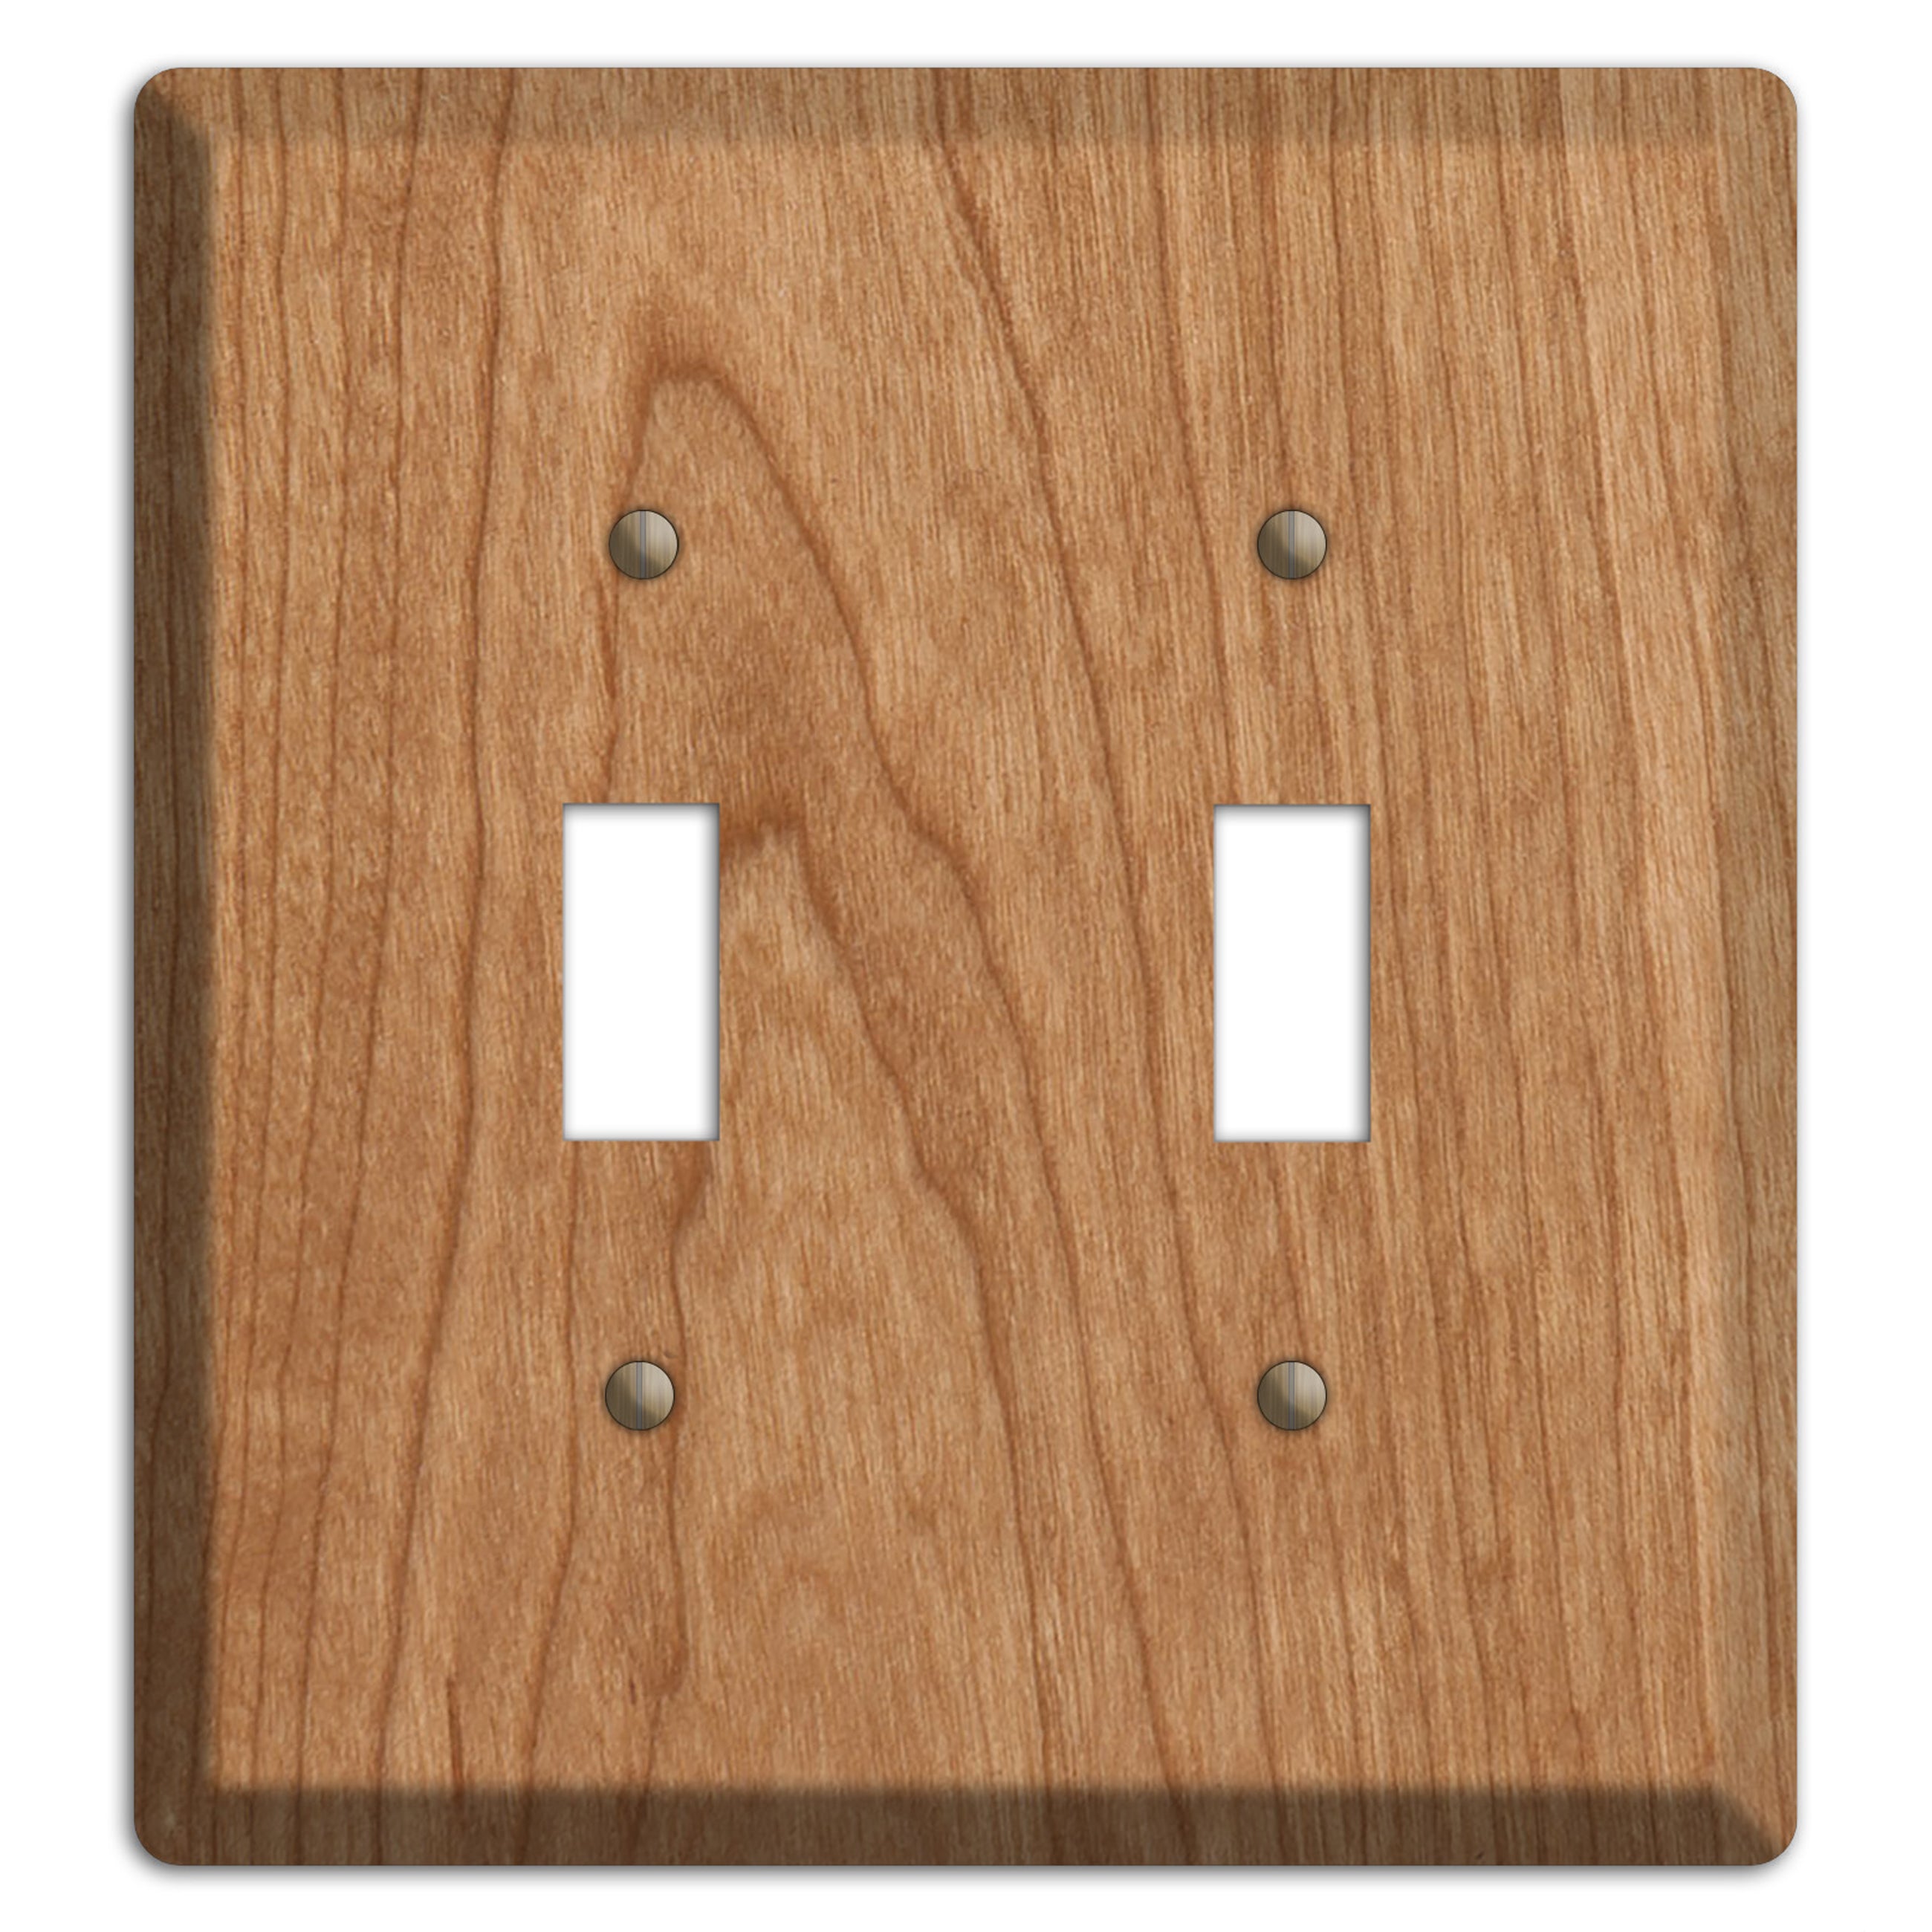 Cherry Wood Cover Plates –